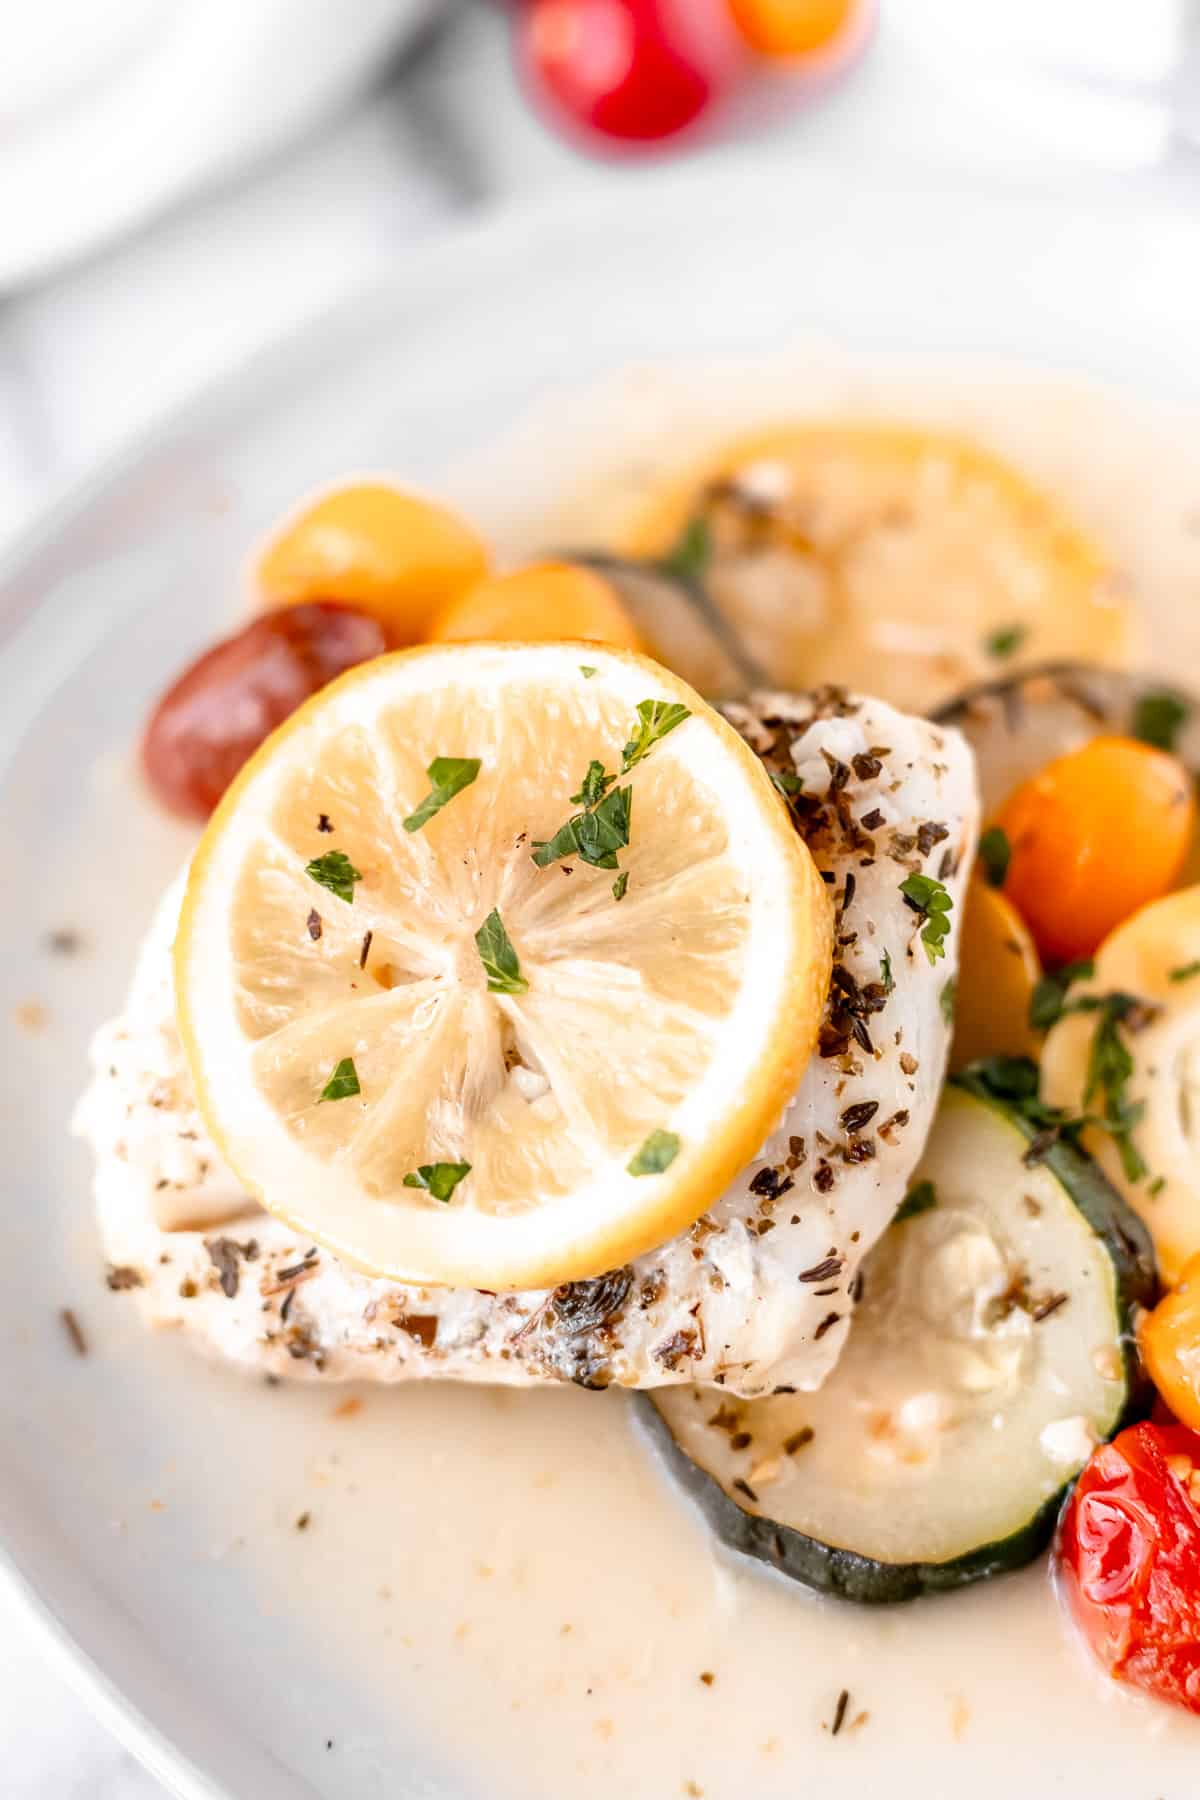 Baked cod topped with lemons on a plate of vegetables such as zucchini and tomatoes in a butter sauce.